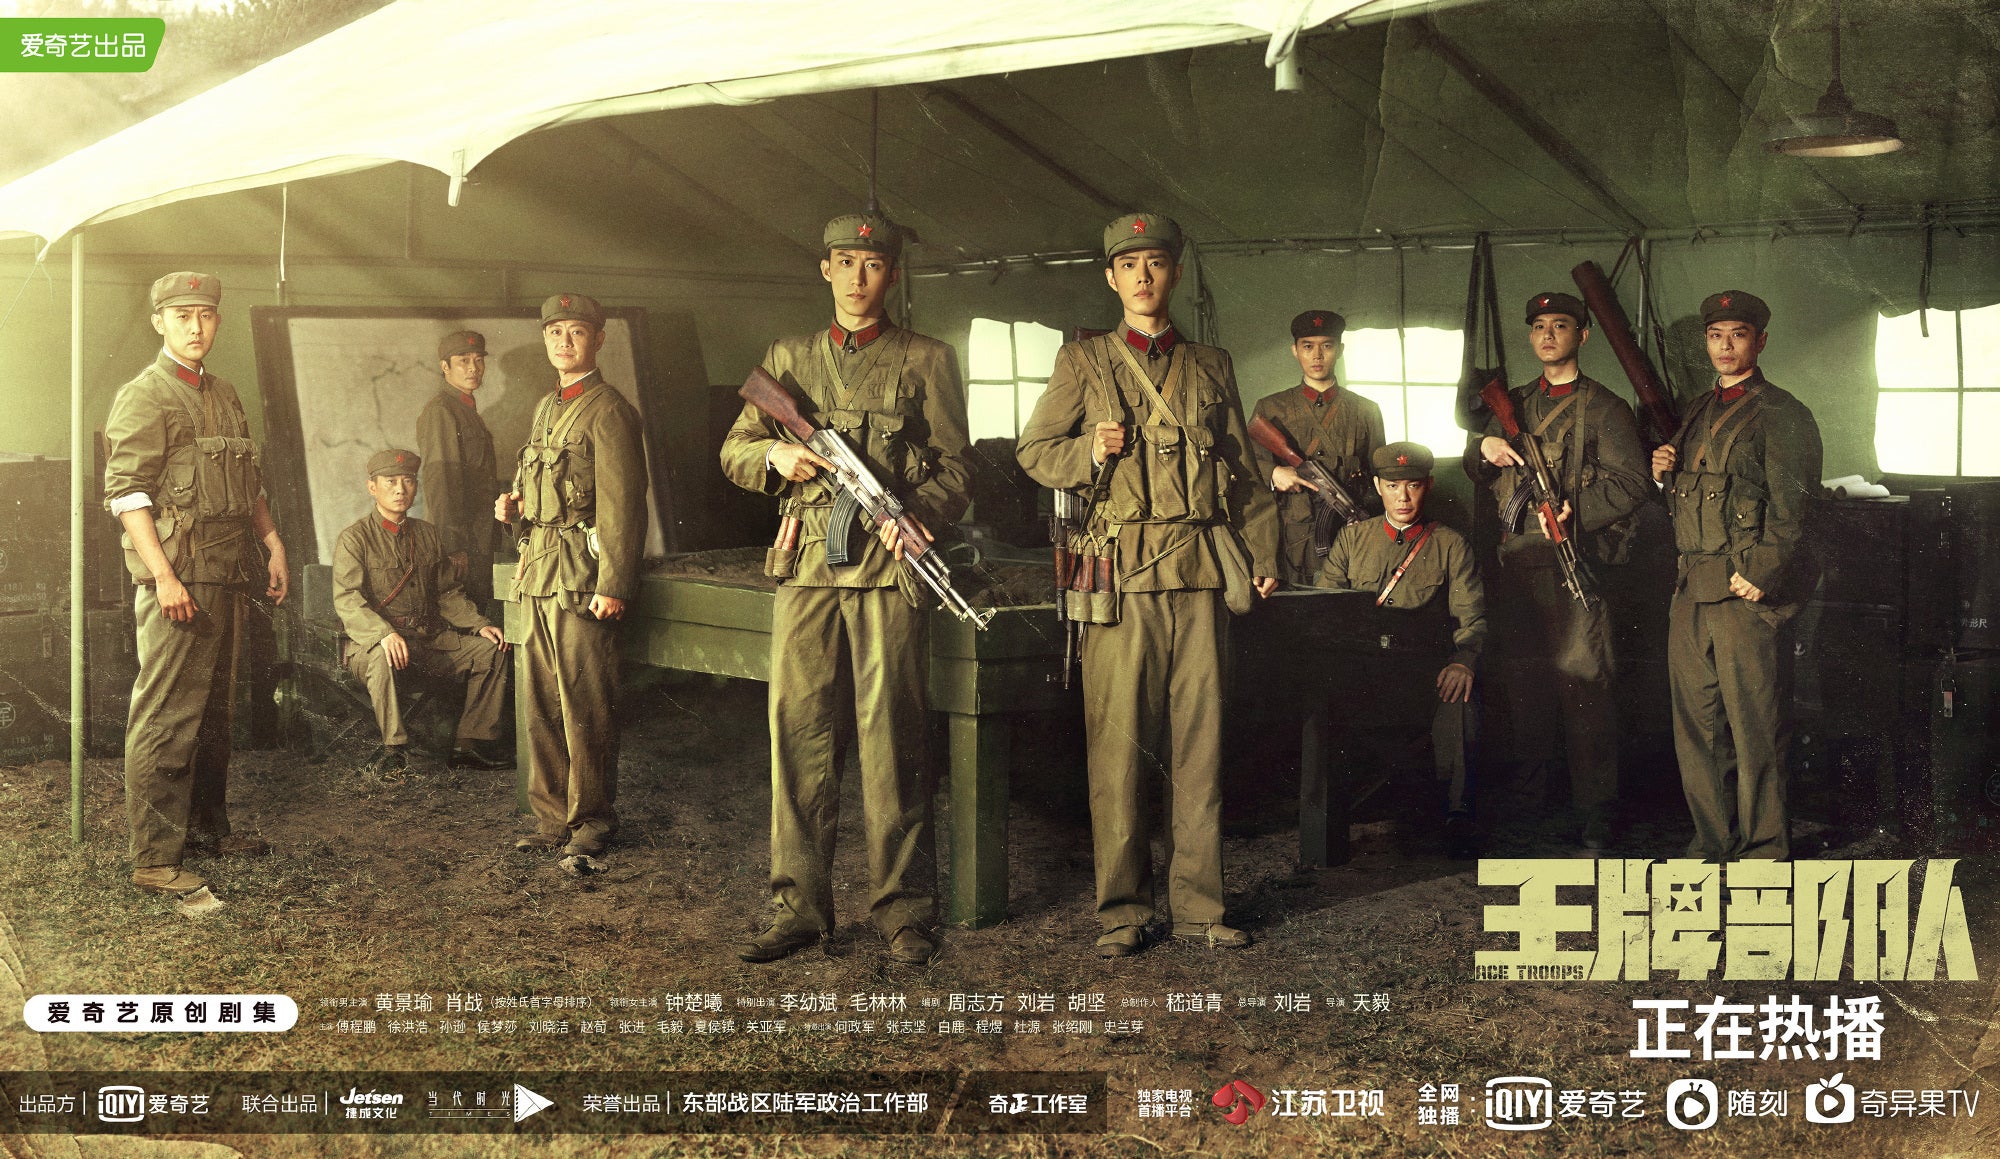 TV ratings for Ace Troops (王牌部队) in Malaysia. iqiyi TV series